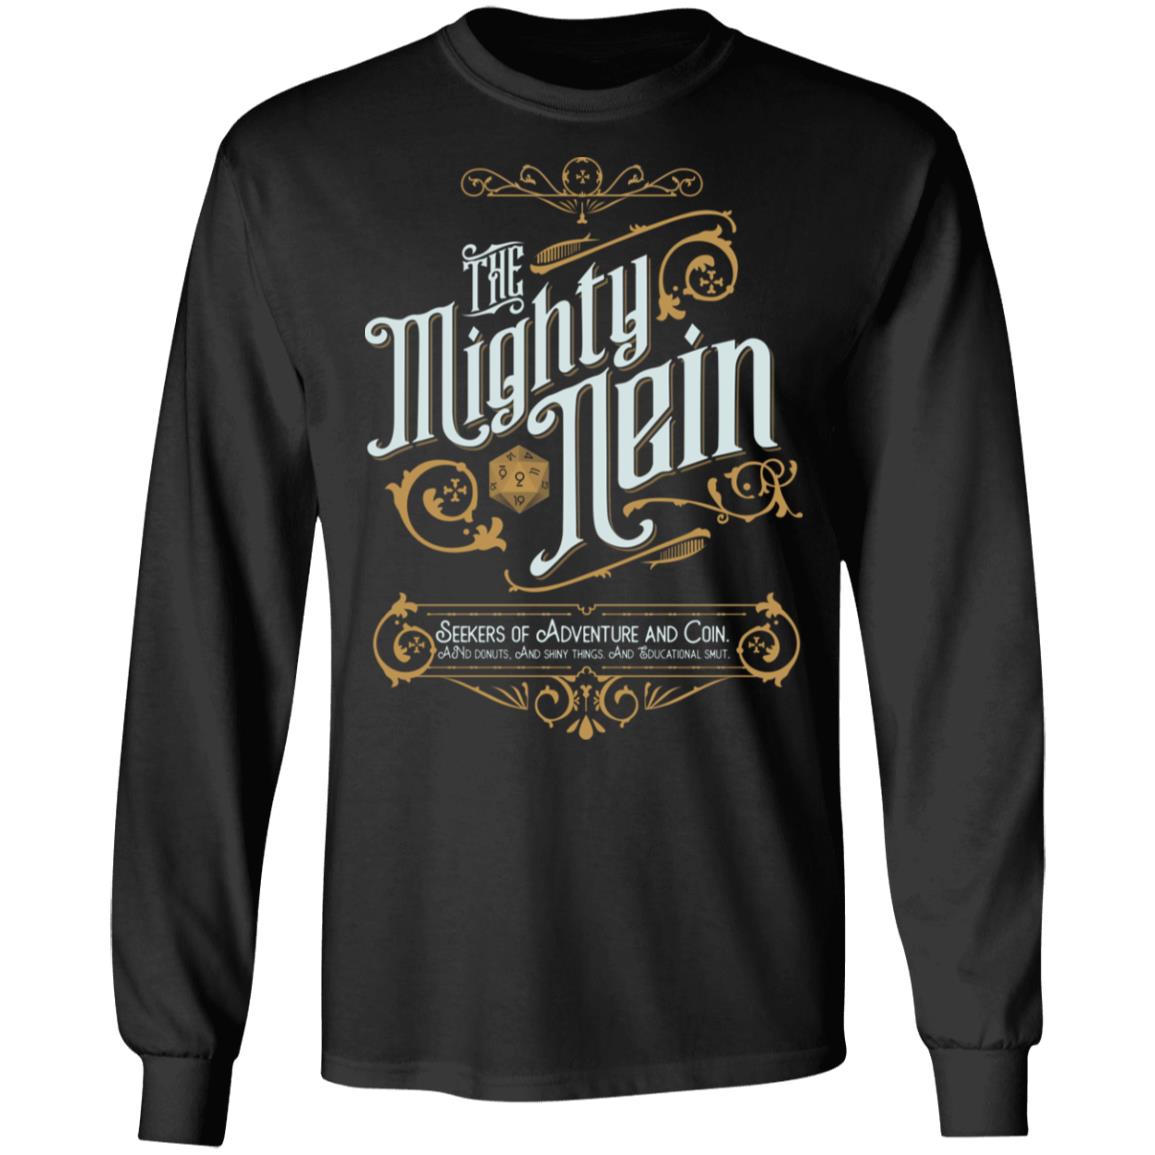 Mighty Nein DnD Veth Nott Critical Role Inspired Long Sleeve Tee T-Shirt